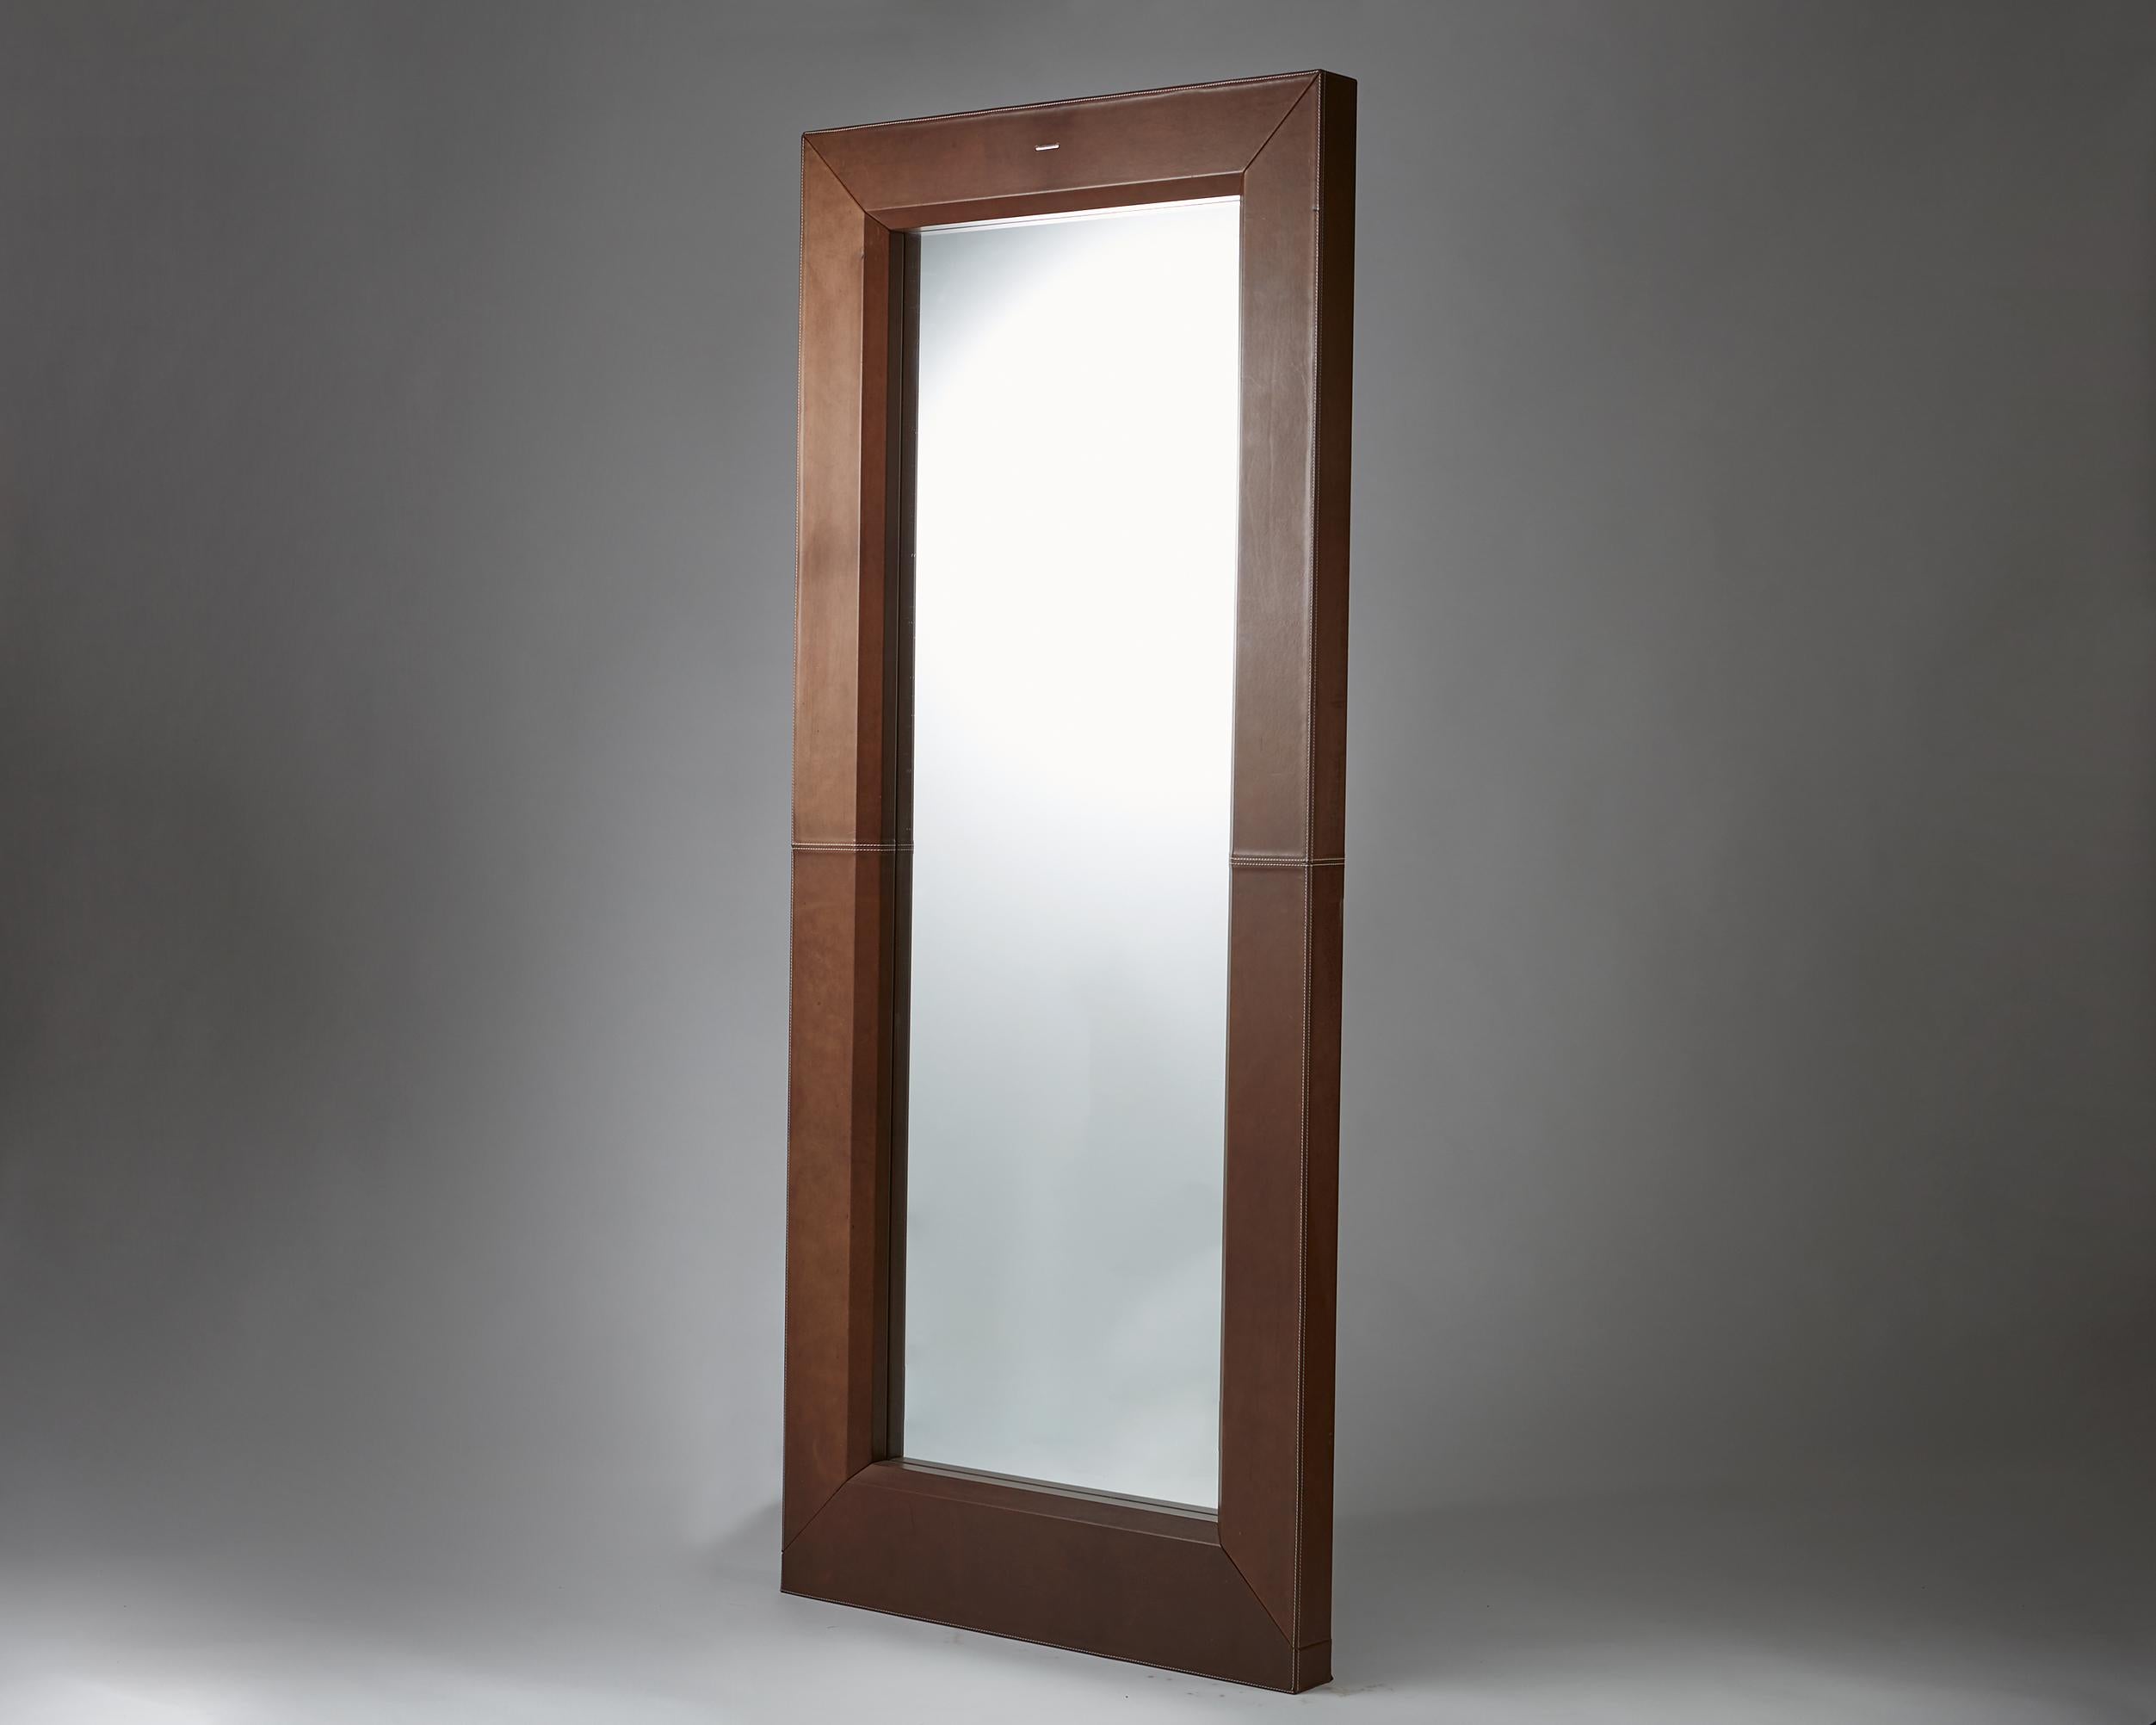 Mirror designed by Enrico Tonucci for Triangolo,
Italy. 1980s. 

Wood, leather and mirrored glass.

Measurements: 
H: 210 cm/ 6' 11''
W: 90 cm/ 3'